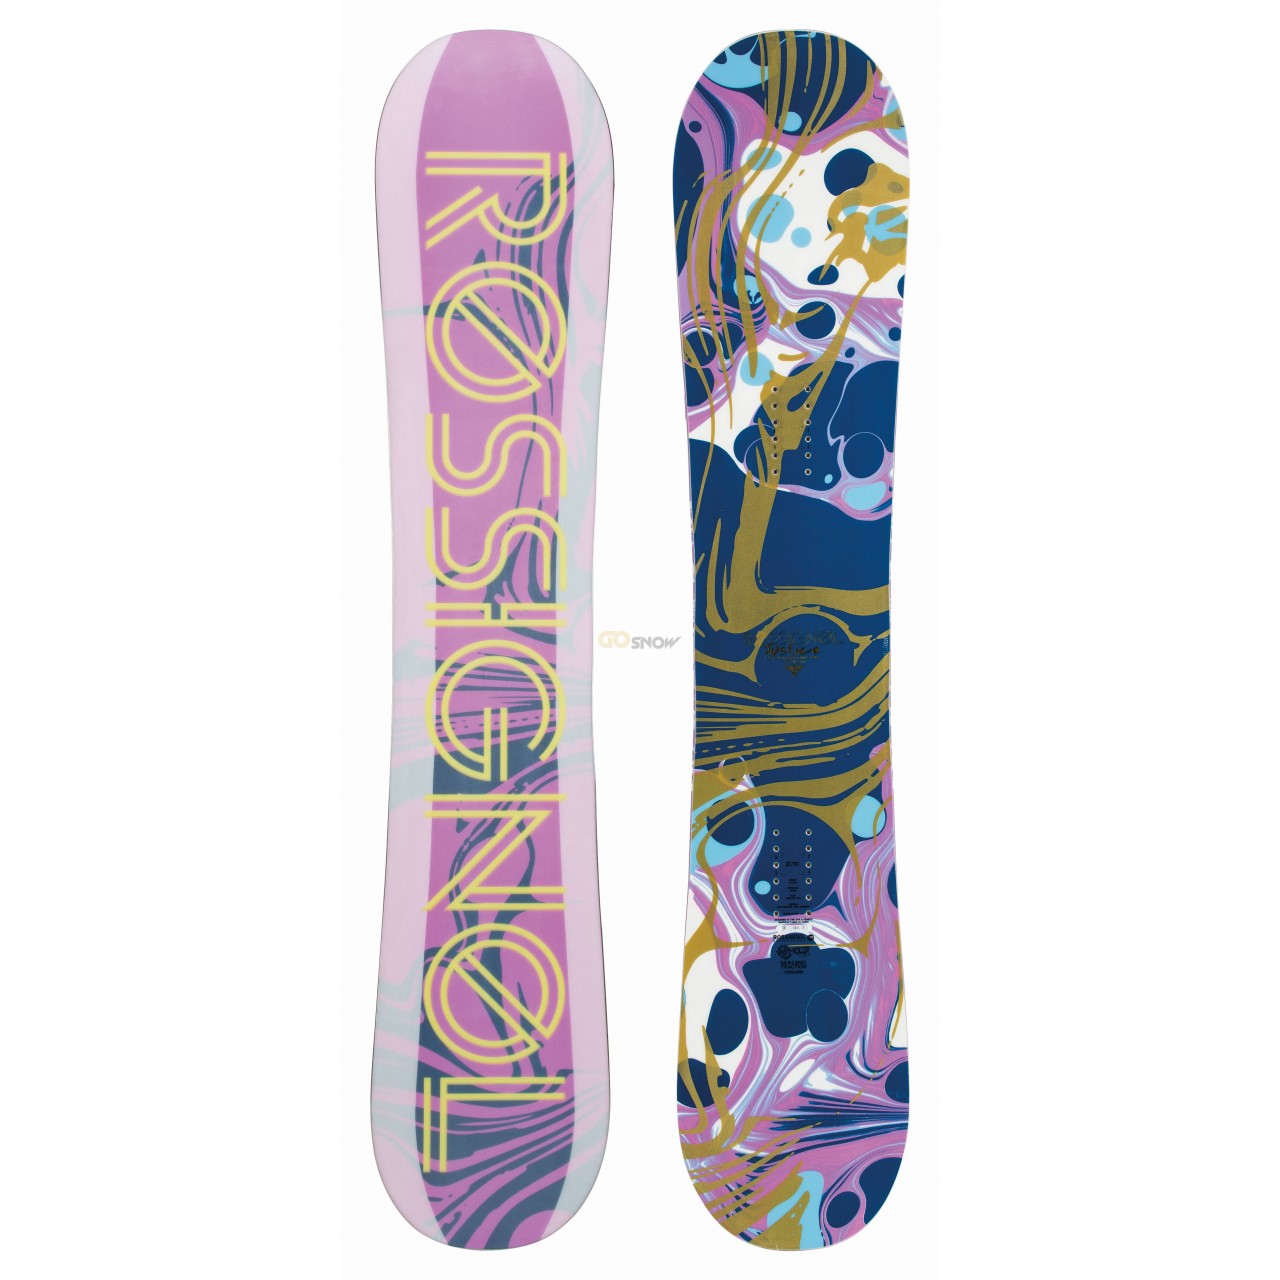 SNOWBOARD NEUF ROSSIGNOL JUSTICE + FIXATION